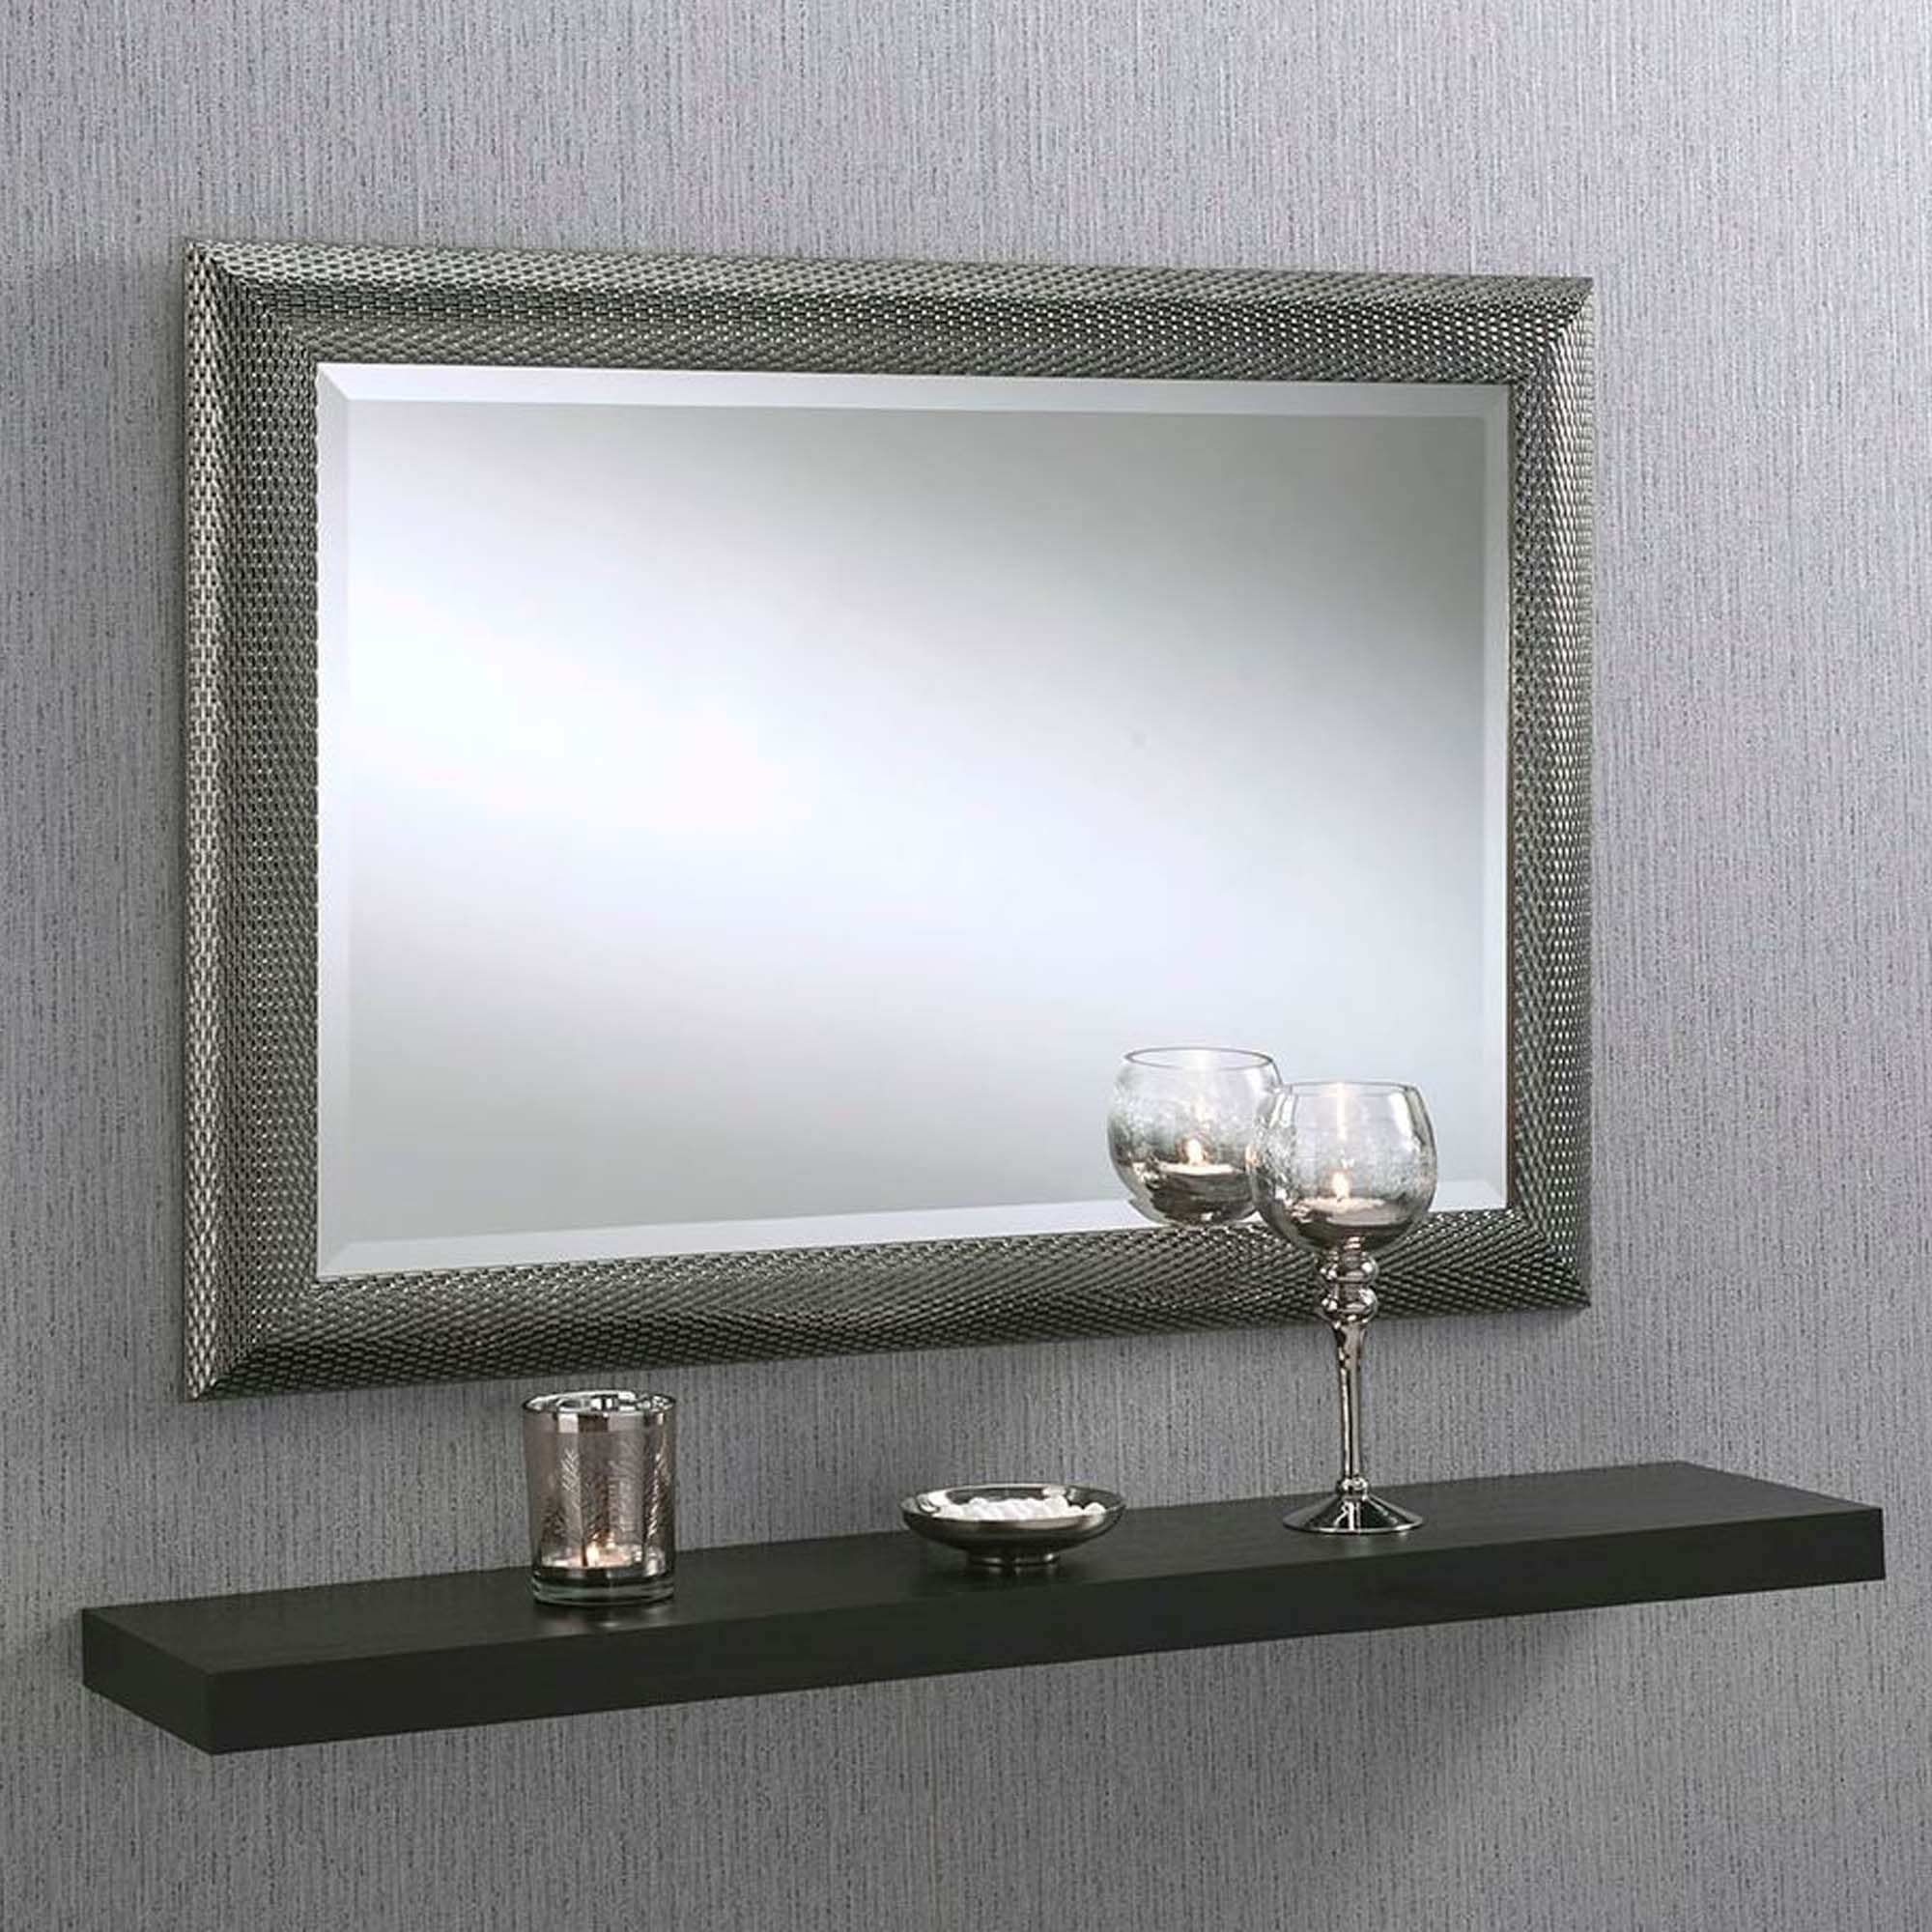 Dimple Effect Grey Rectangular Wall Mirror | Homesdirect365 In Wall Mirrors (View 5 of 15)